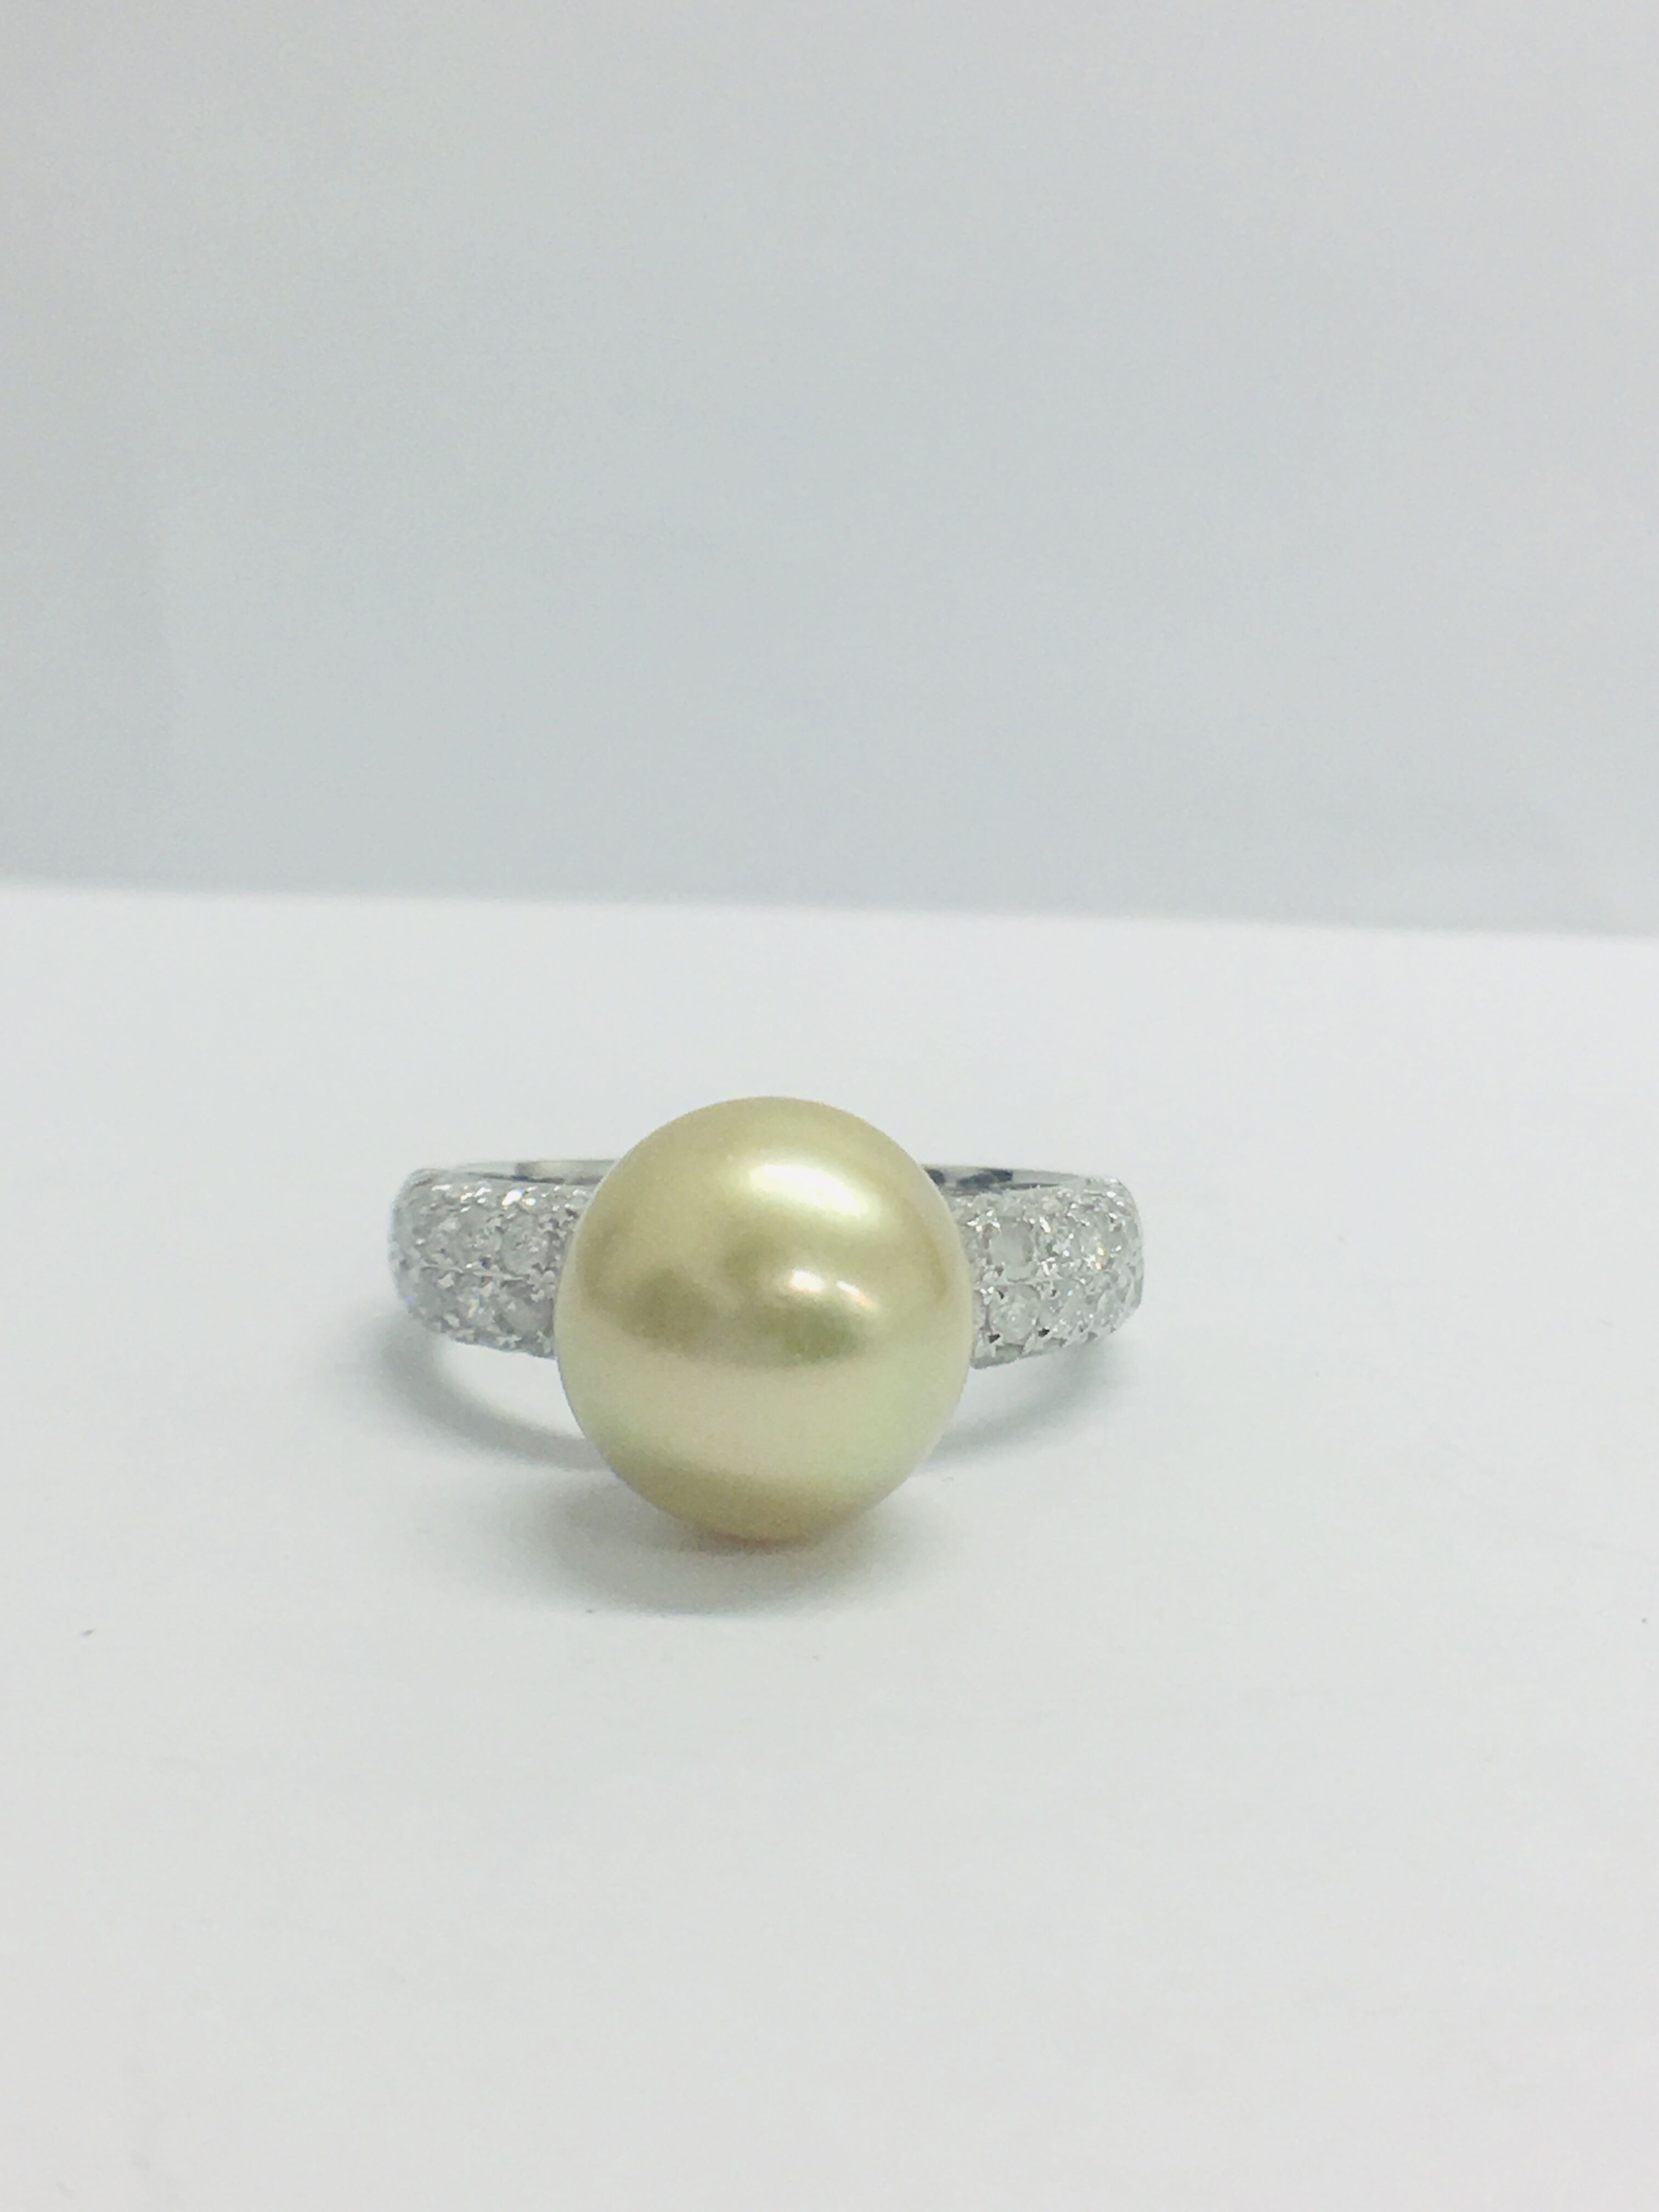 14Ct White Gold Pearl & Diamond Ring. - Image 3 of 11